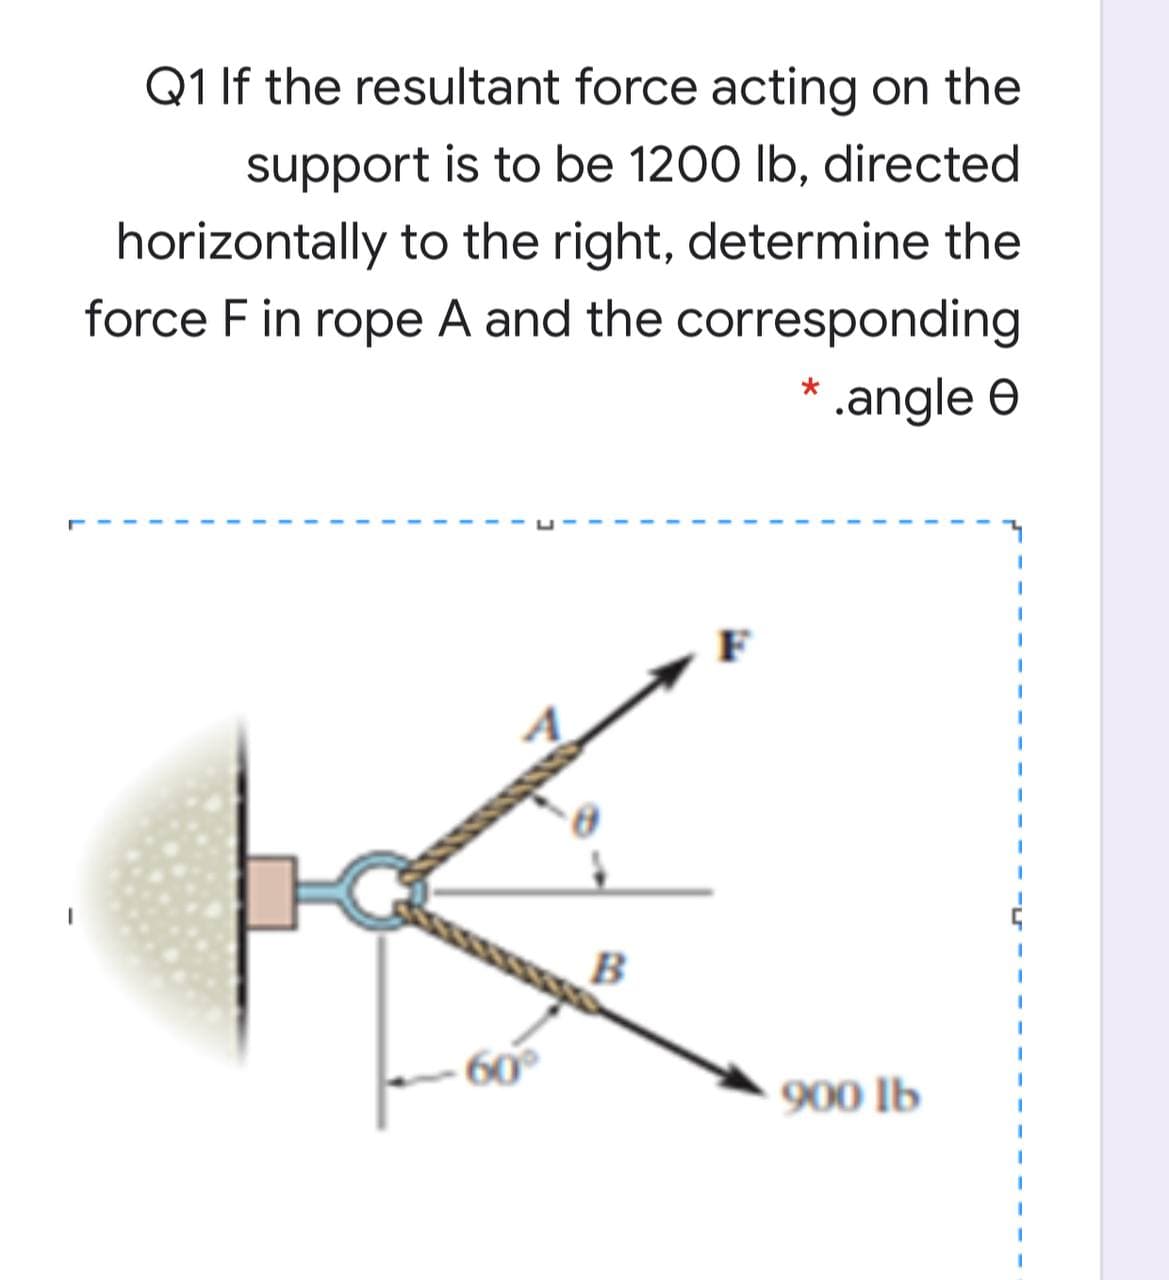 Q1 If the resultant force acting on the
support is to be 1200 lb, directed
horizontally to the right, determine the
force F in rope A and the corresponding
* .angle e
K.
B
60
900 lb
